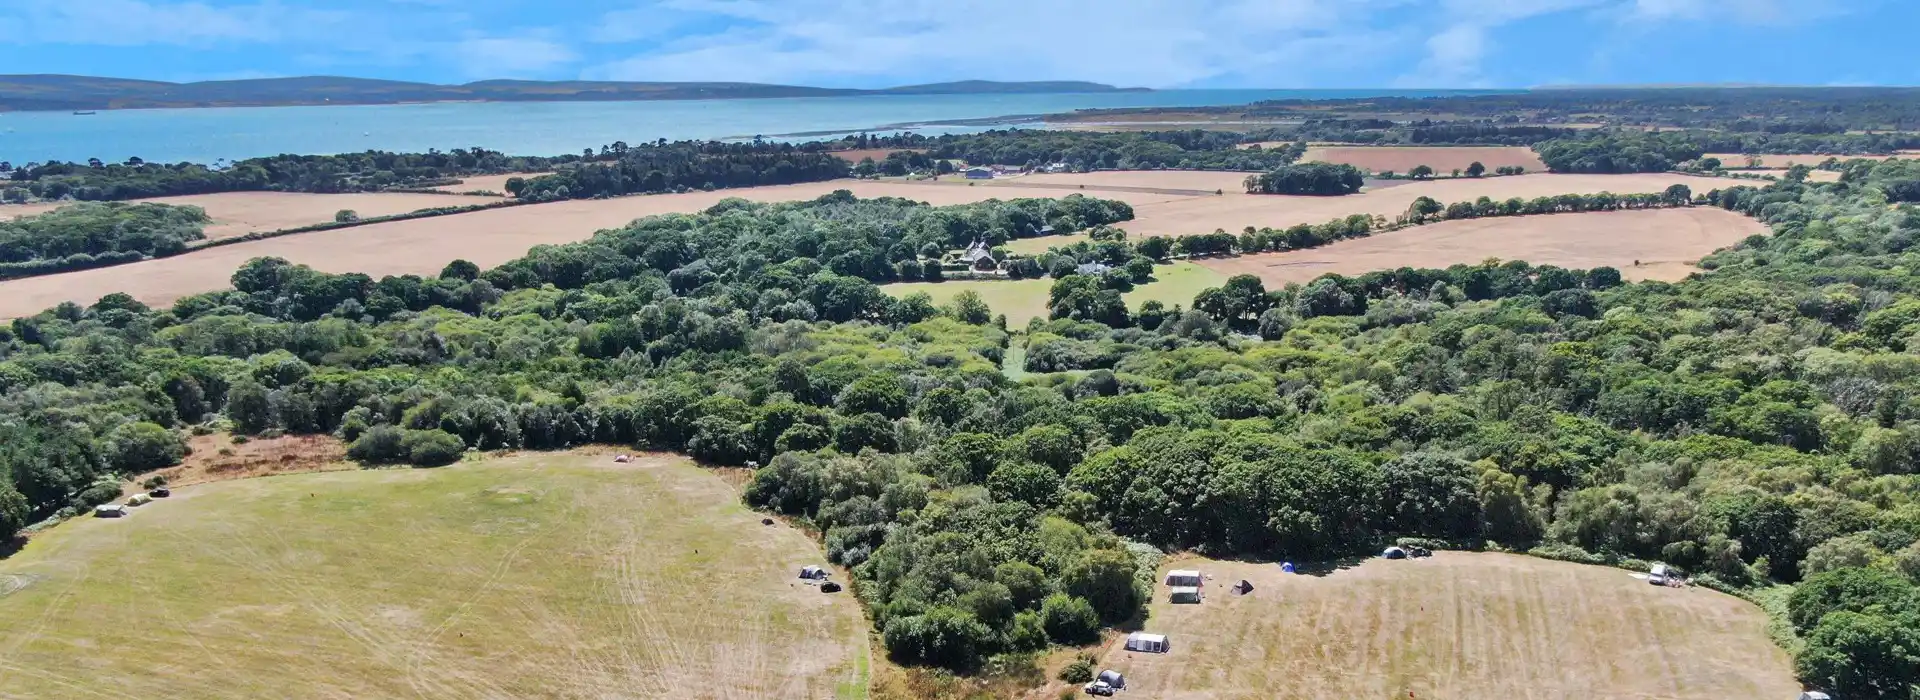 Campsites near the beach in the New Forest